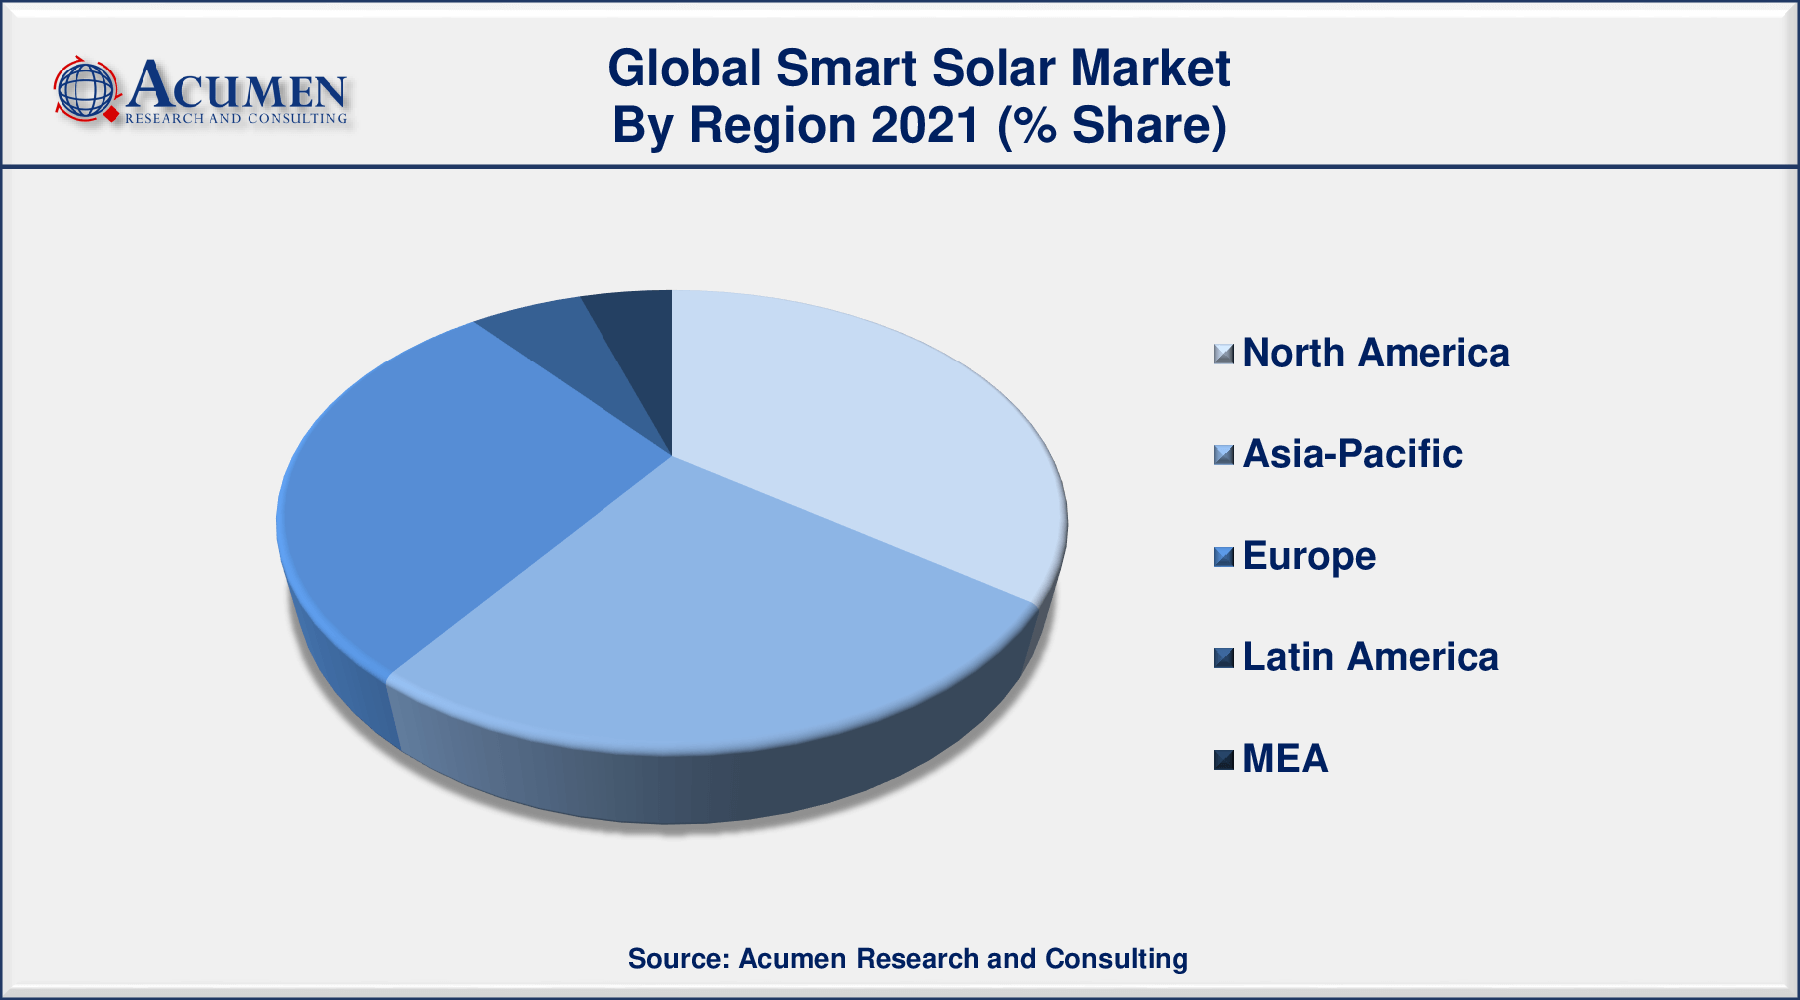 Global smart solar market revenue anticipated to gain USD 62,279 million by 2030 with a CAGR of 15.8% from 2022 to 2030